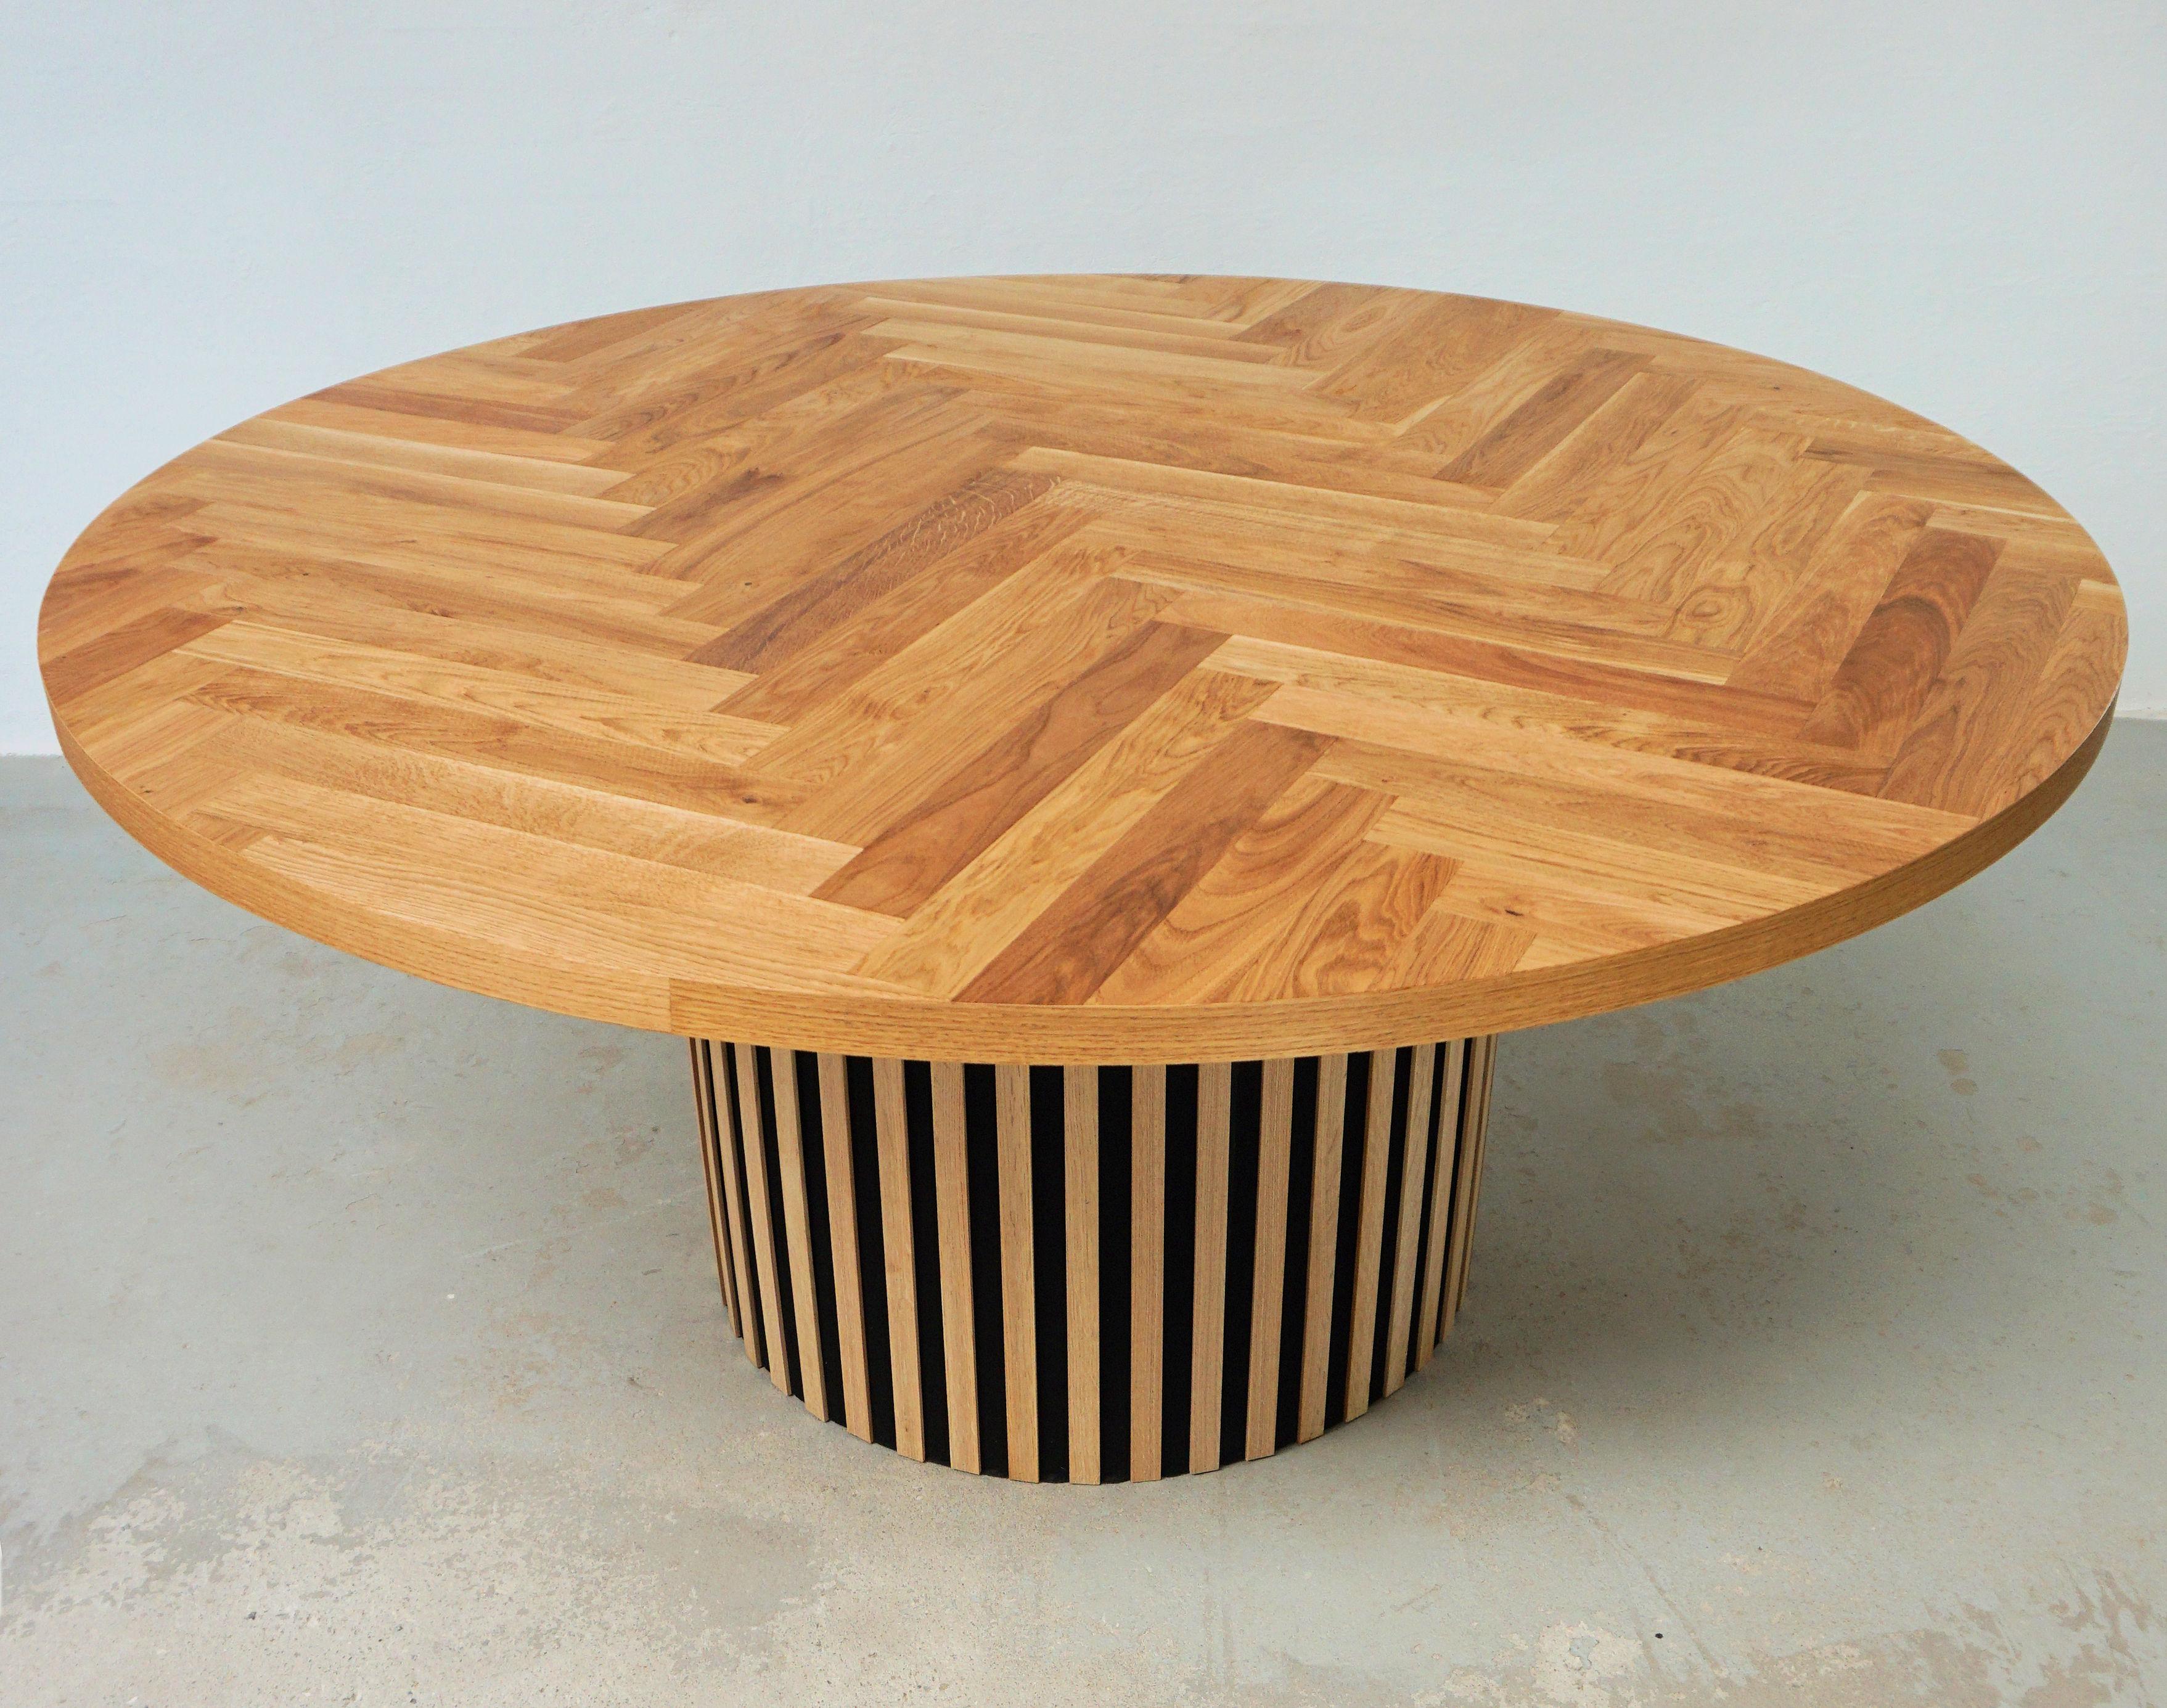 Danish Modernist Customizabel Handcrafted Circular Dining Table in Oak In New Condition For Sale In Knebel, DK